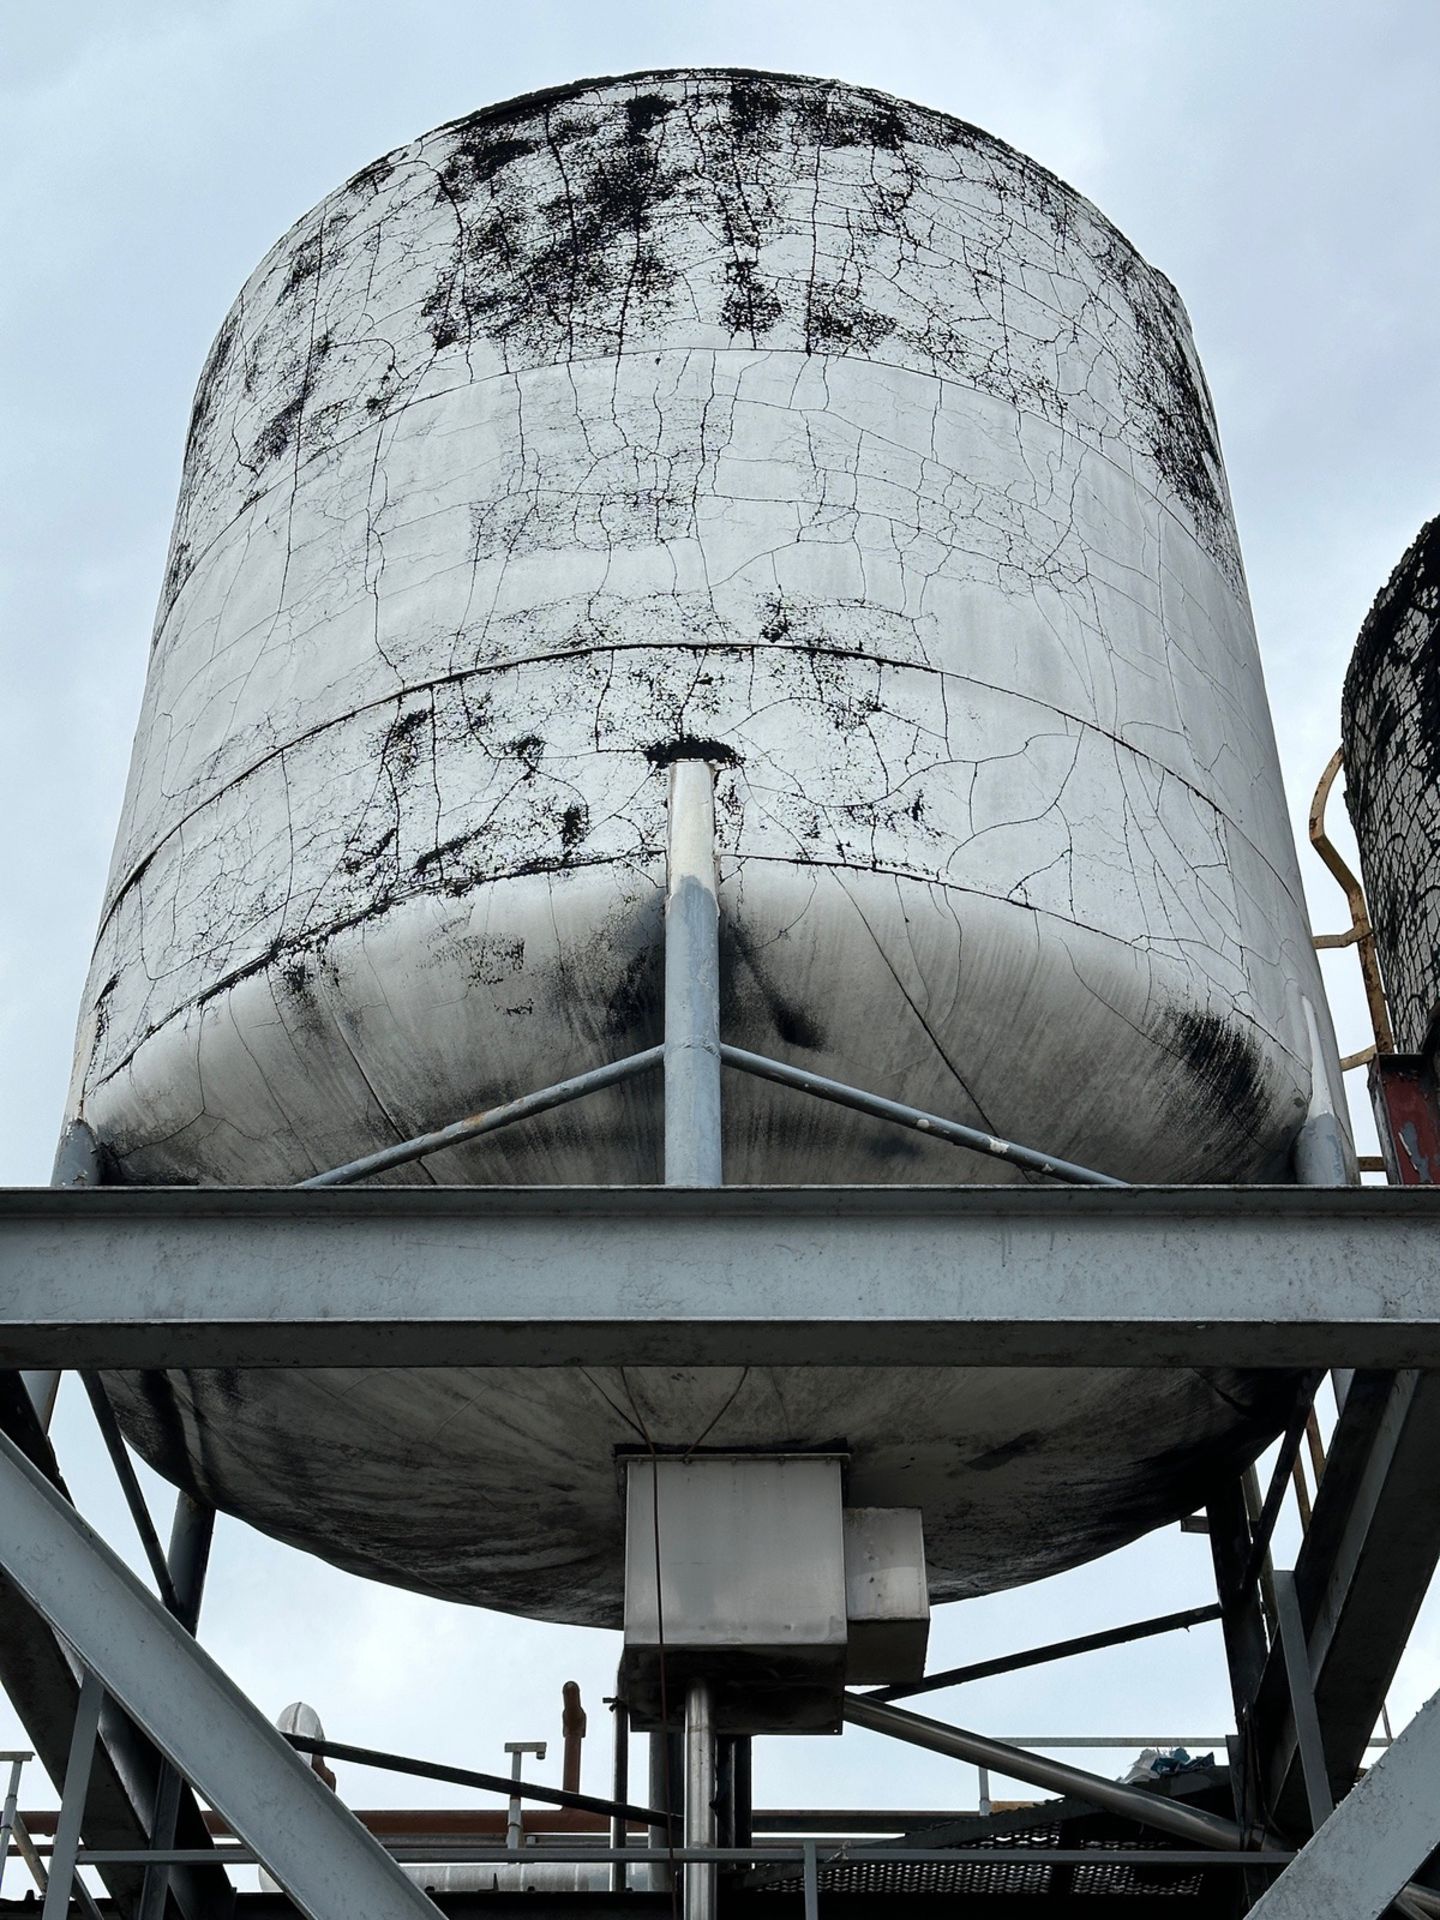 Stainless Steel 7500 Gallon Insulated Tank - Dish Bottom, Manway (Approx | Rig Fee $1800 - Image 3 of 3